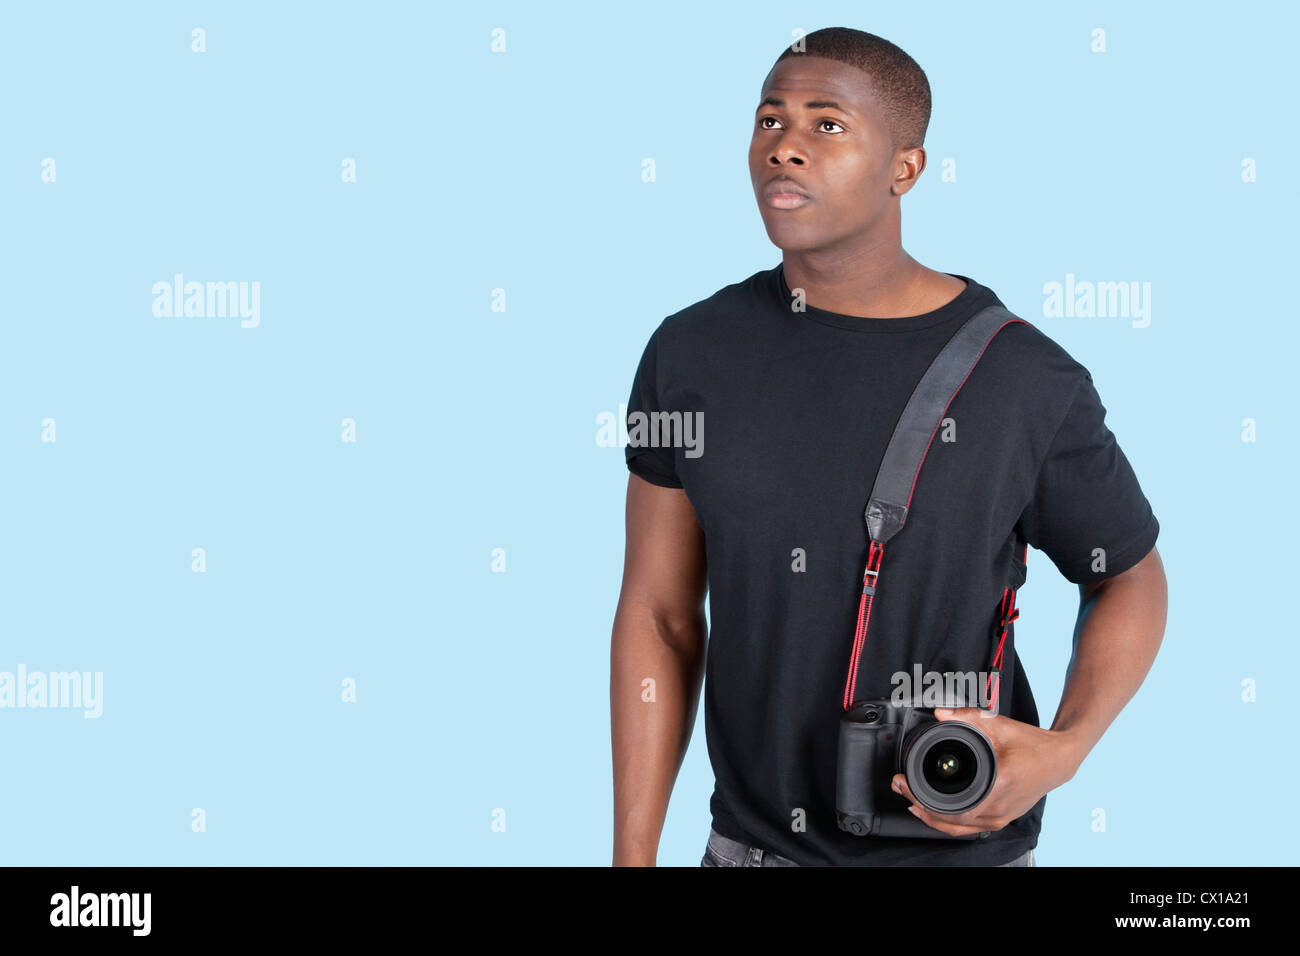 Young African American man with digital camera looking up over blue background Stock Photo